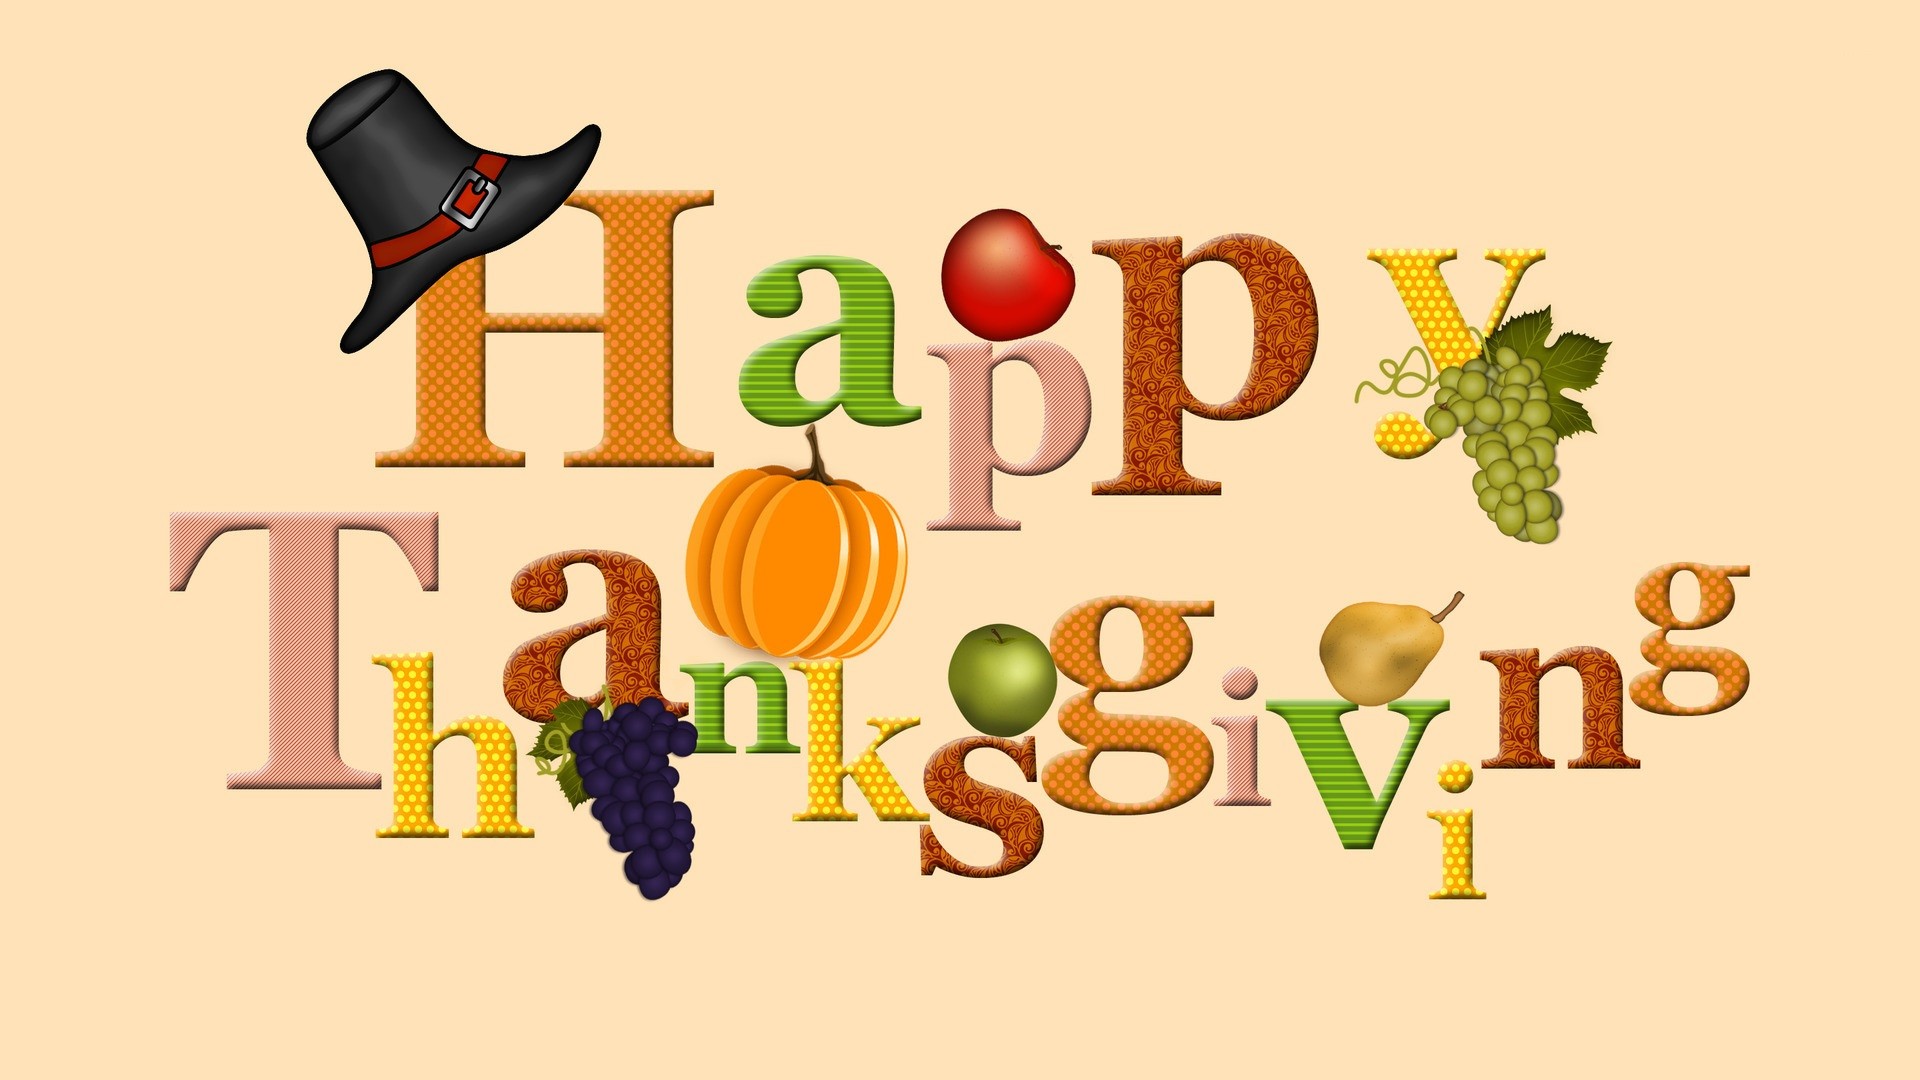 Home Happy Thanksgiving Day Greetings Image